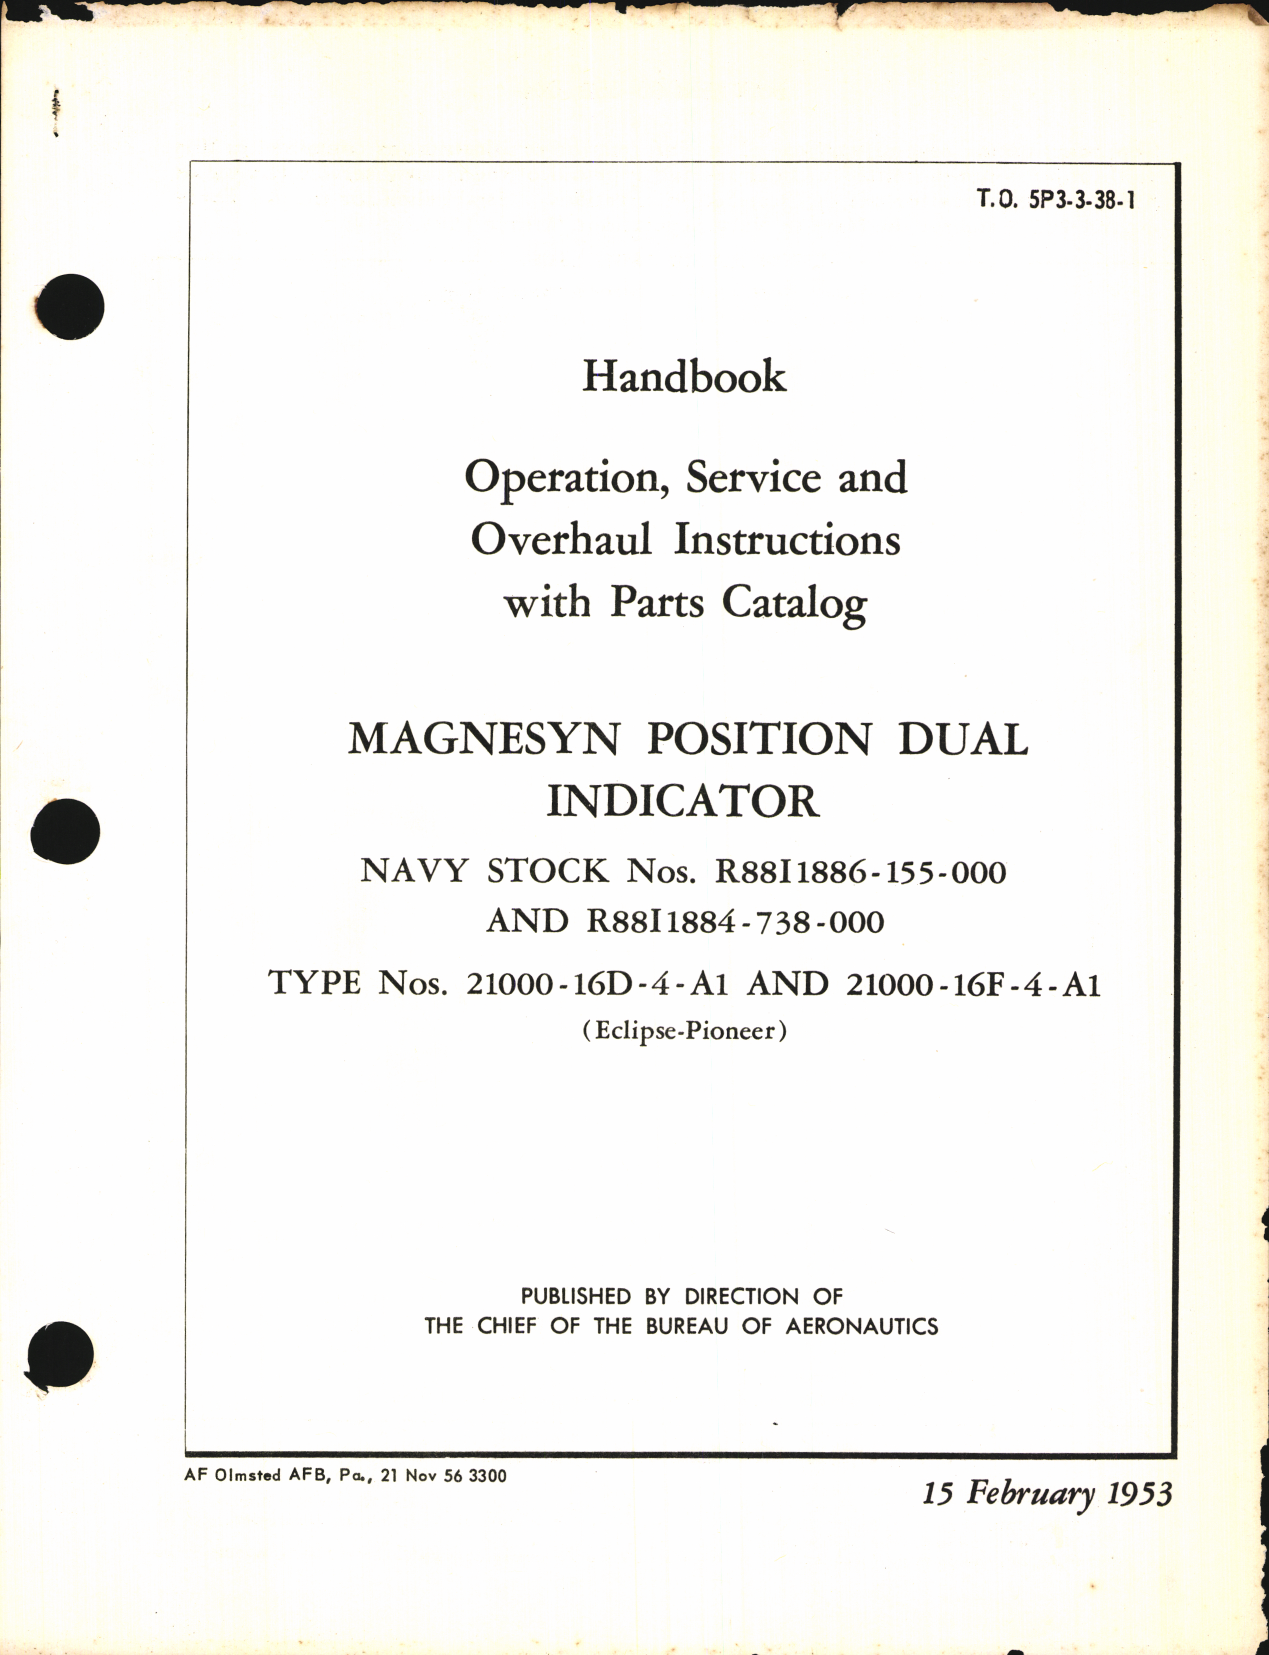 Sample page 1 from AirCorps Library document: Operation, Service, & Overhaul Inst w/ Parts Catalog for Magnesyn Position Indicator